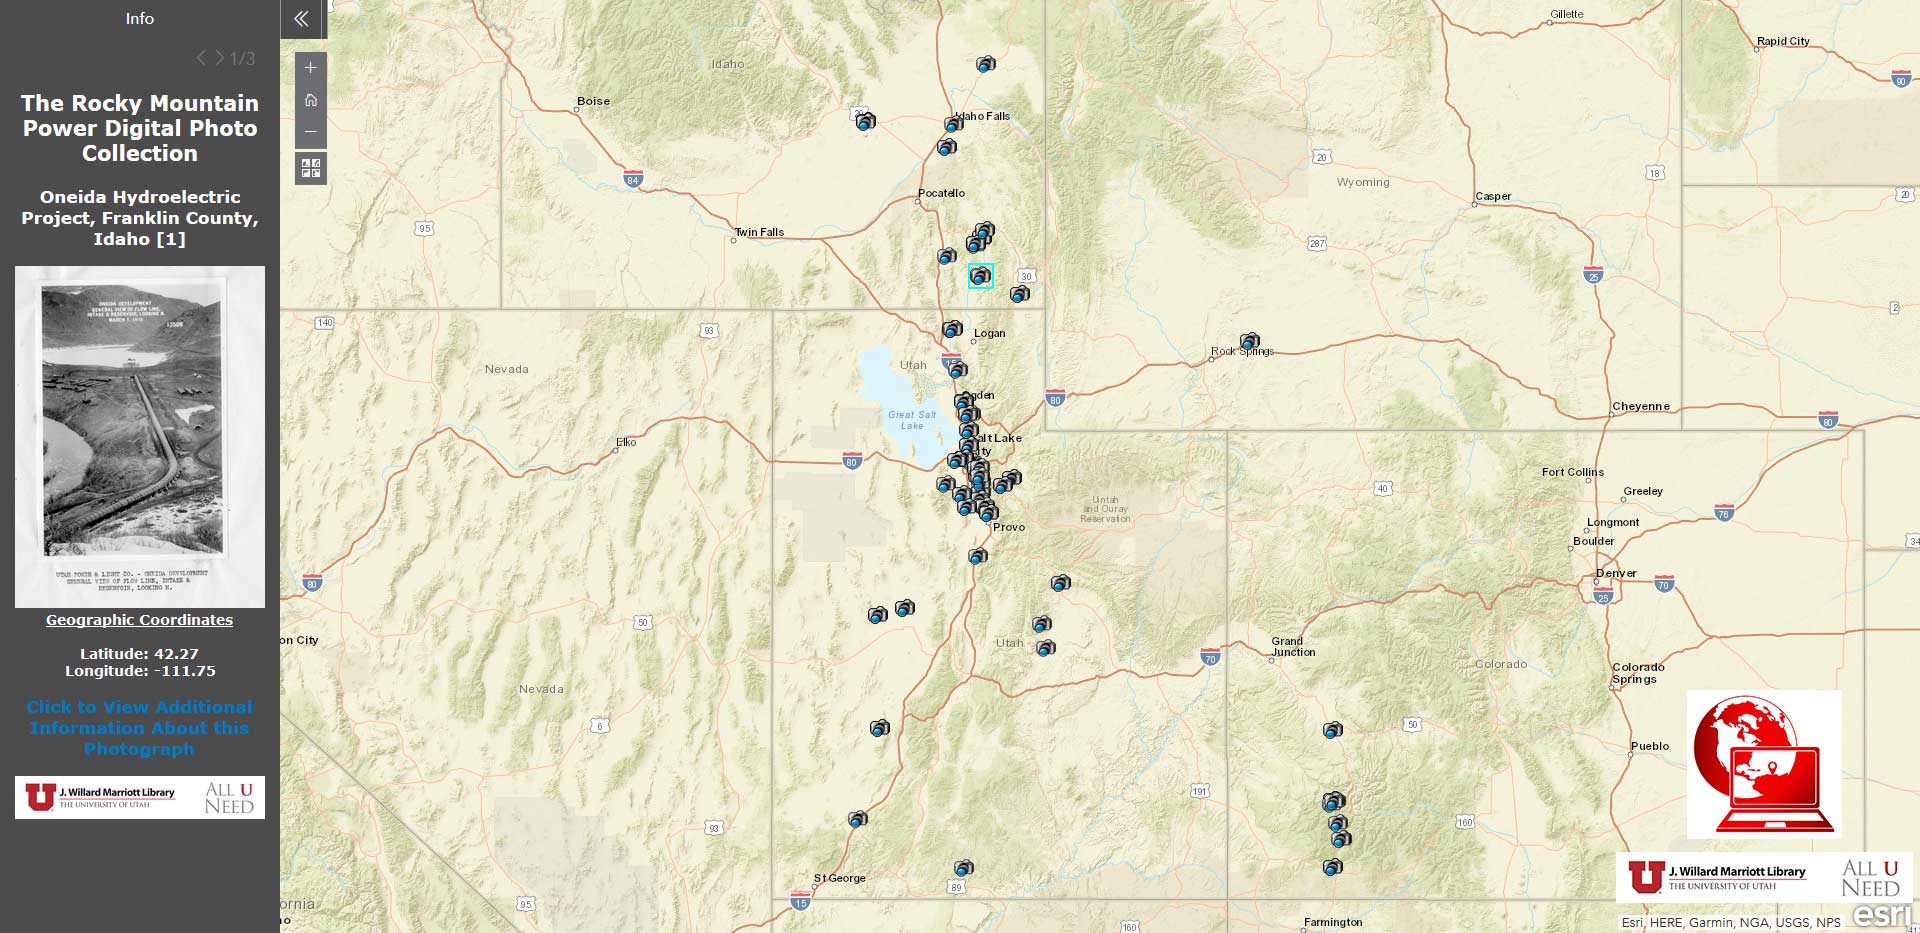 The Rocky Mountain Power Digital Photo Collection: An interactive mapping application exploring the digital photograph collection for Rocky Mountain Power.